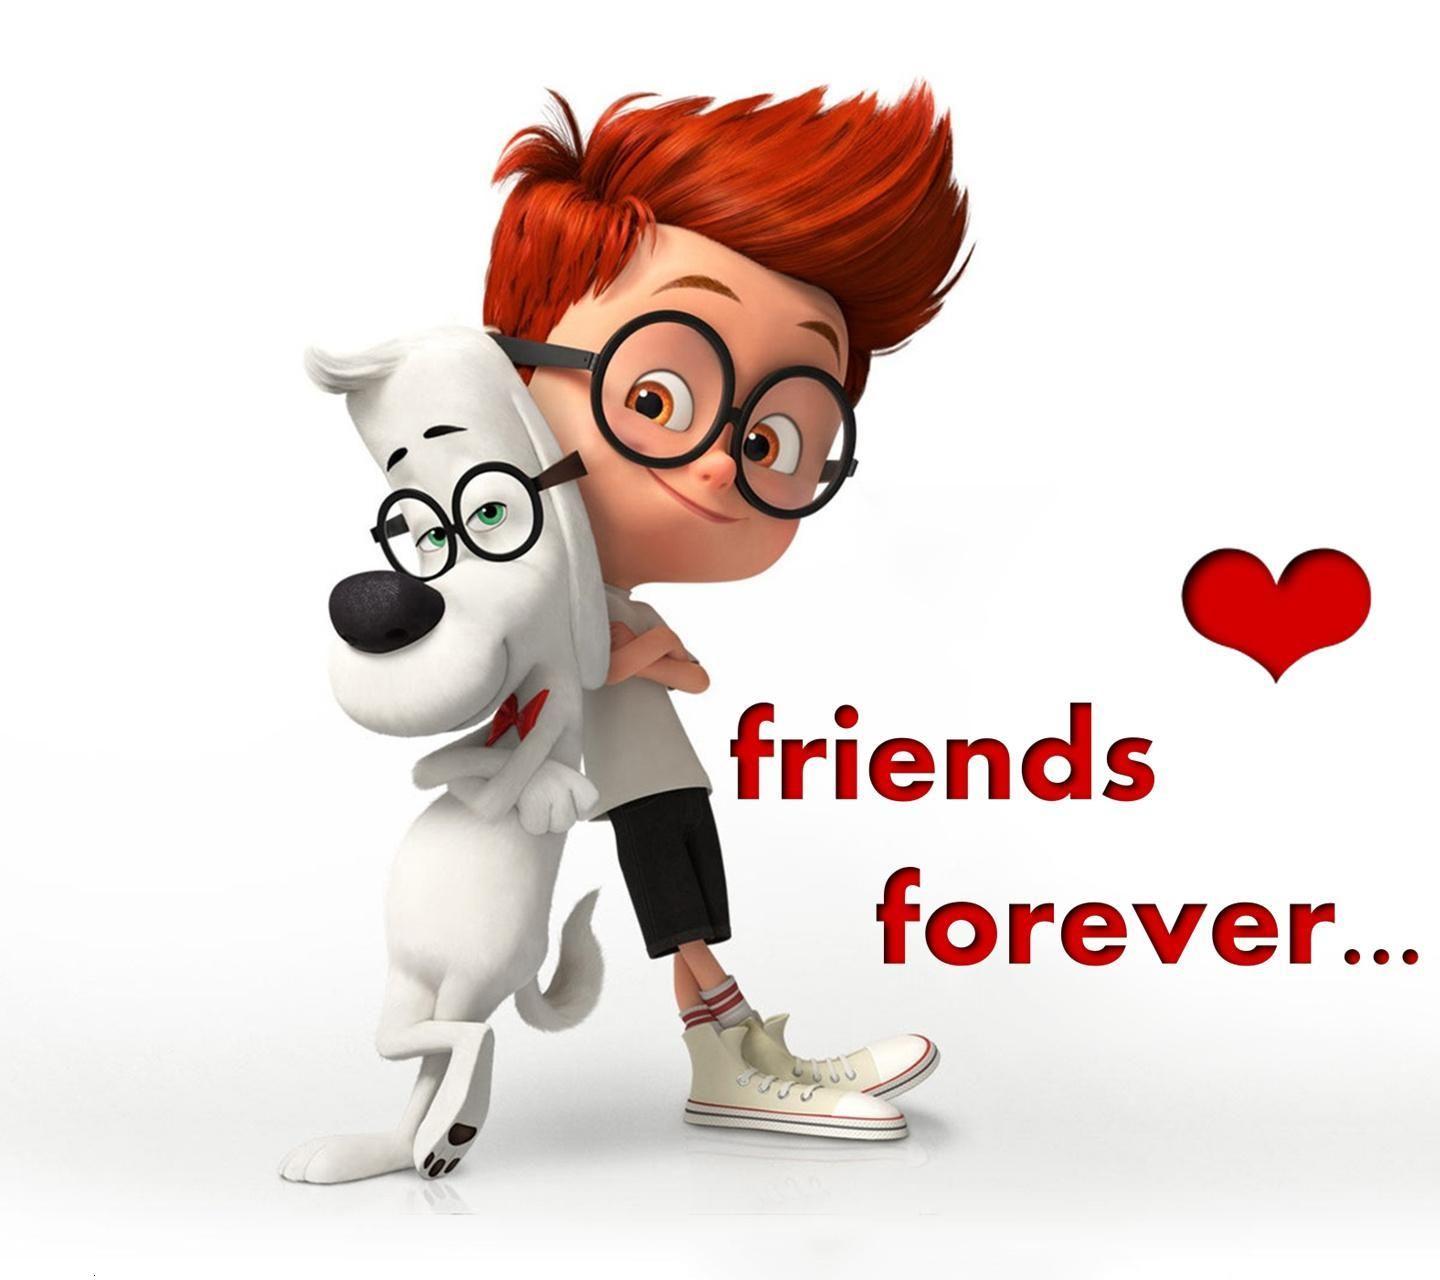 Download Friends forever image day image